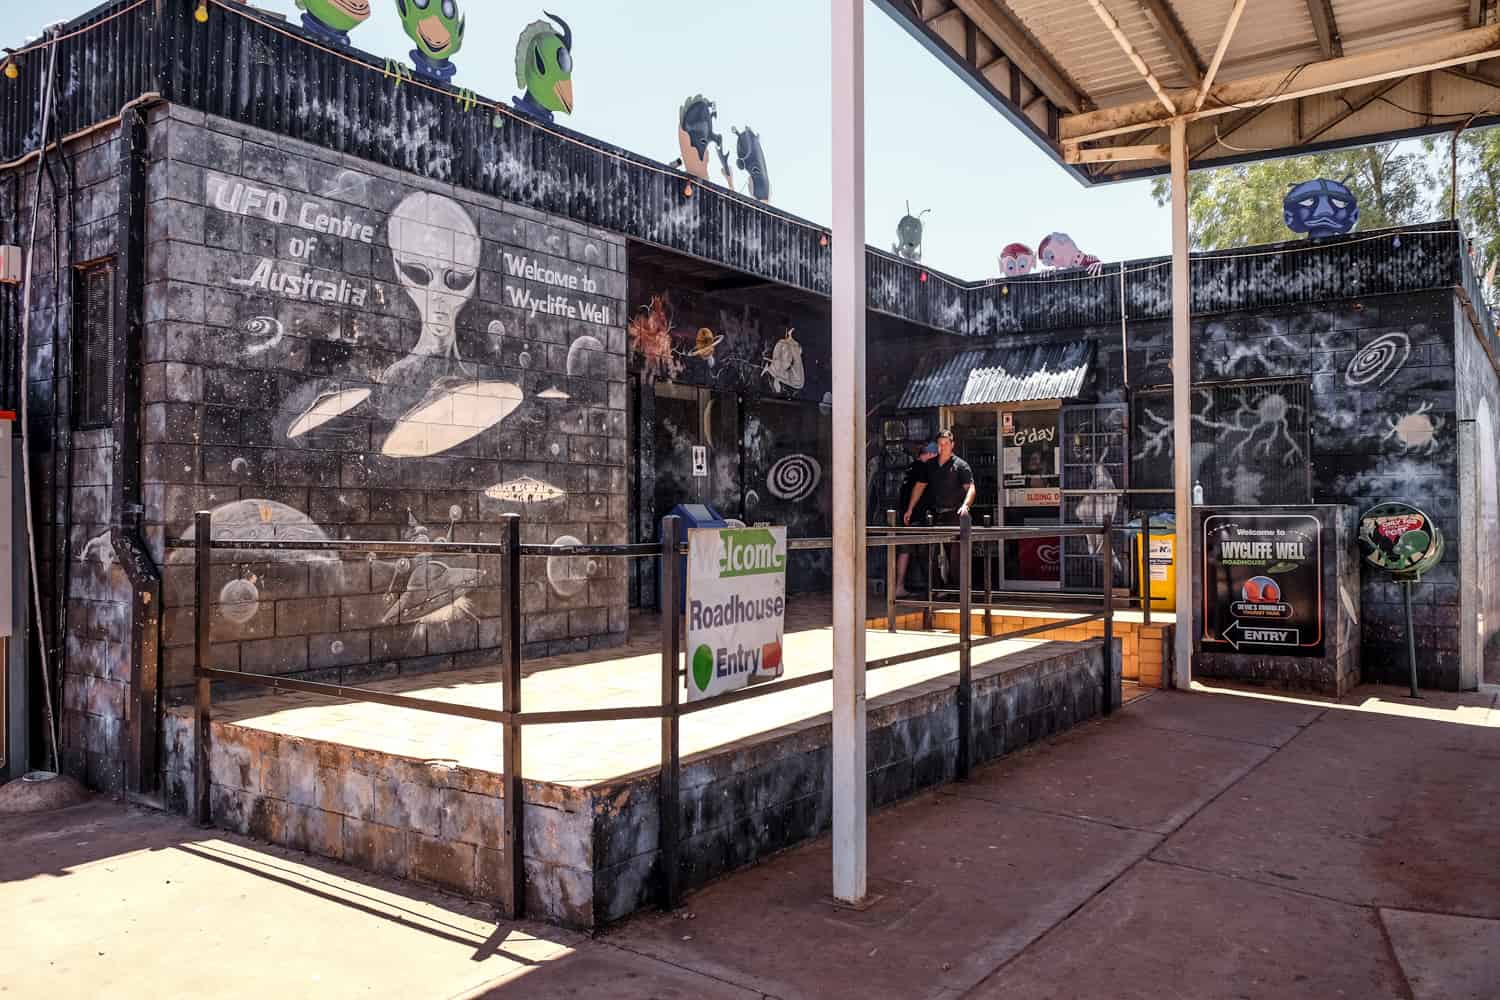 A black painted buildings with images of white aliens in Wycliffe Well - the UFO Capital of Australia.